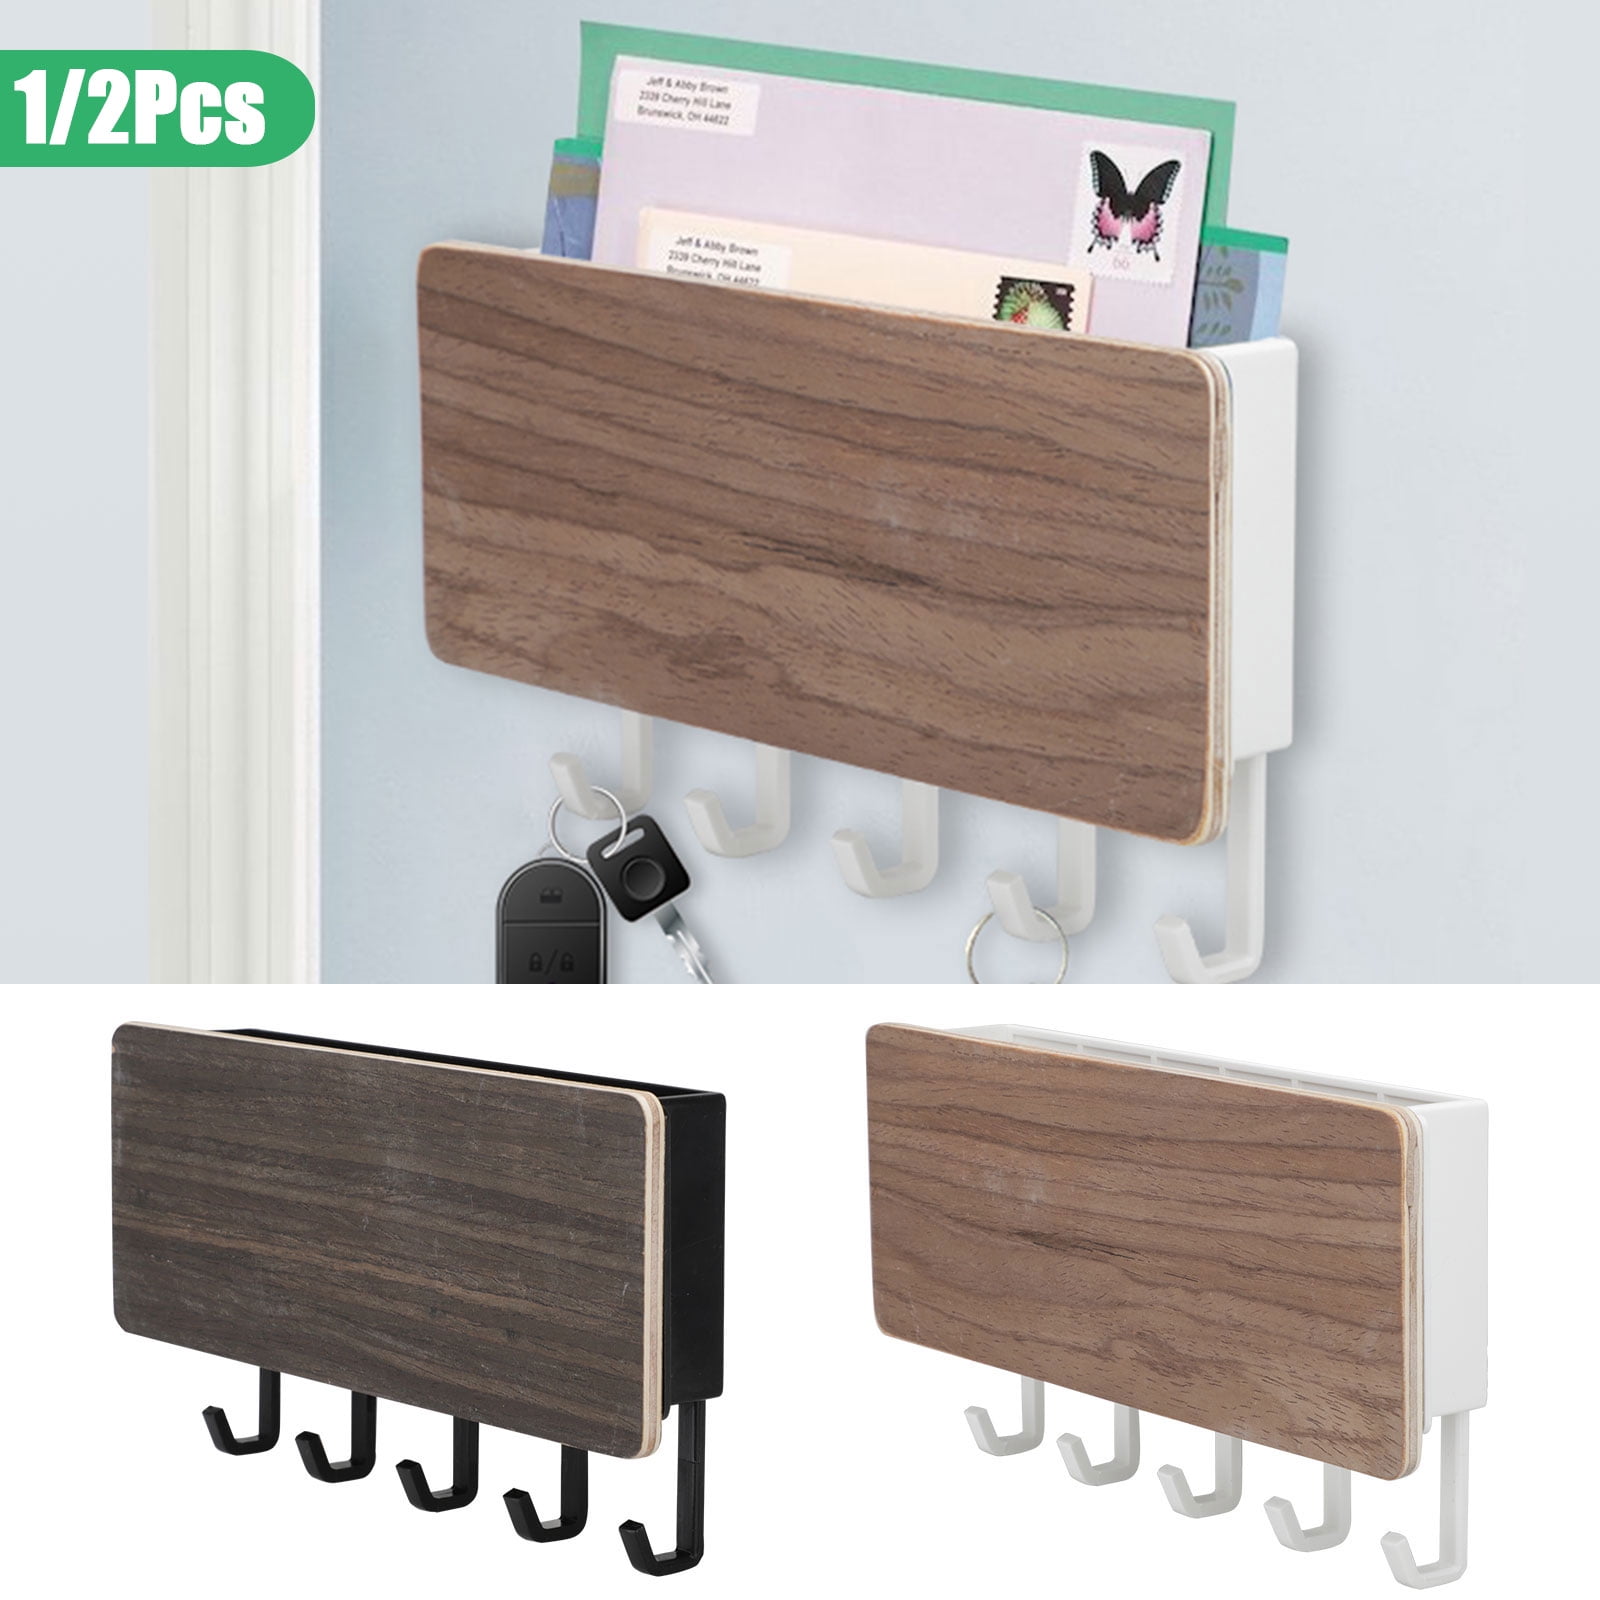 Magicfly Mail Sorter Organizer Wall Mount 2 Slot Wooden Mail Holder for Wall with Chalkboard Surface and 3 Double Key Hooks Bill Letter Organizer for Office Home Décor